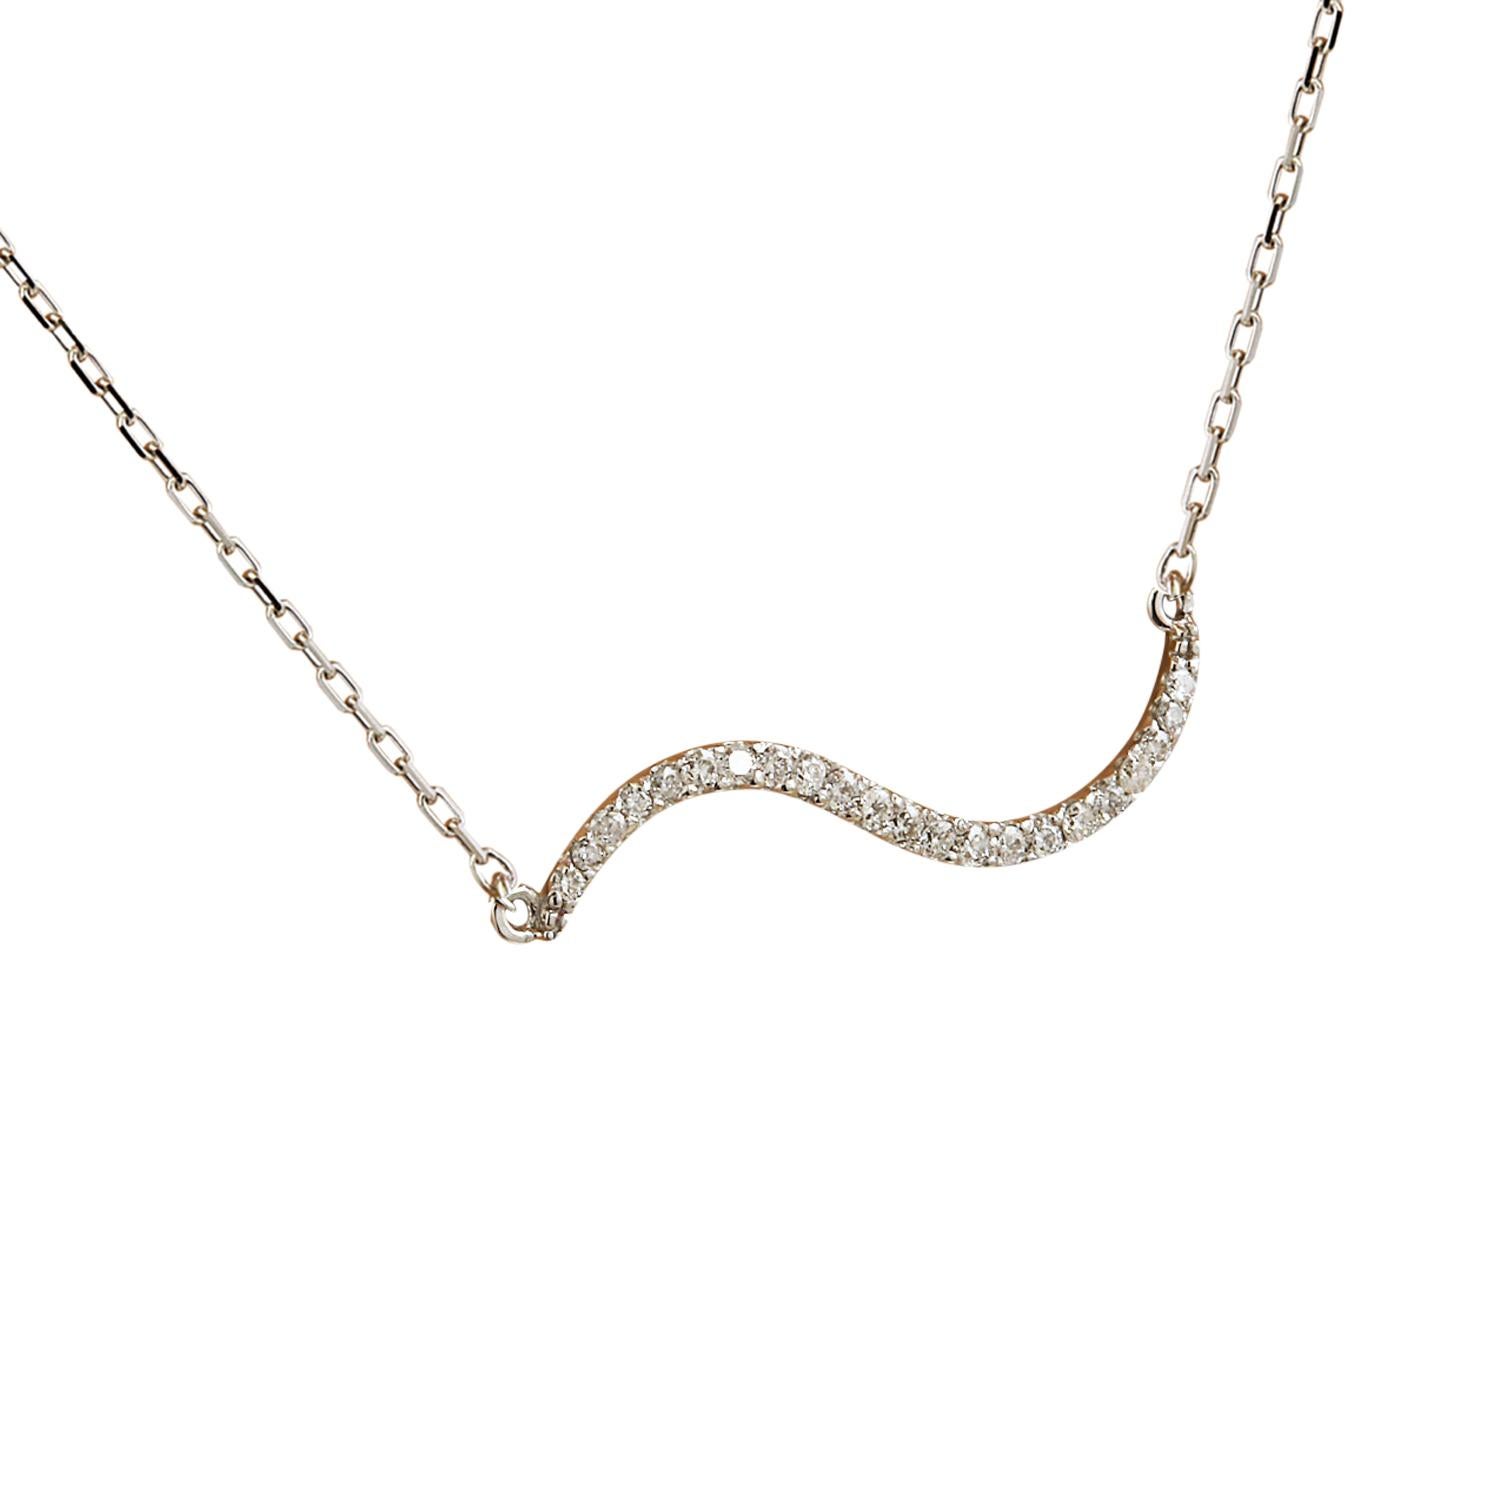 Presenting our elegant 0.25 Carat Natural Diamond Necklace in 14 Karat White Gold. Stamped with 14K authenticity, this necklace weighs 2.1 grams in total and has a length of 16 inches. The necklace features a total of 22 natural diamonds, each